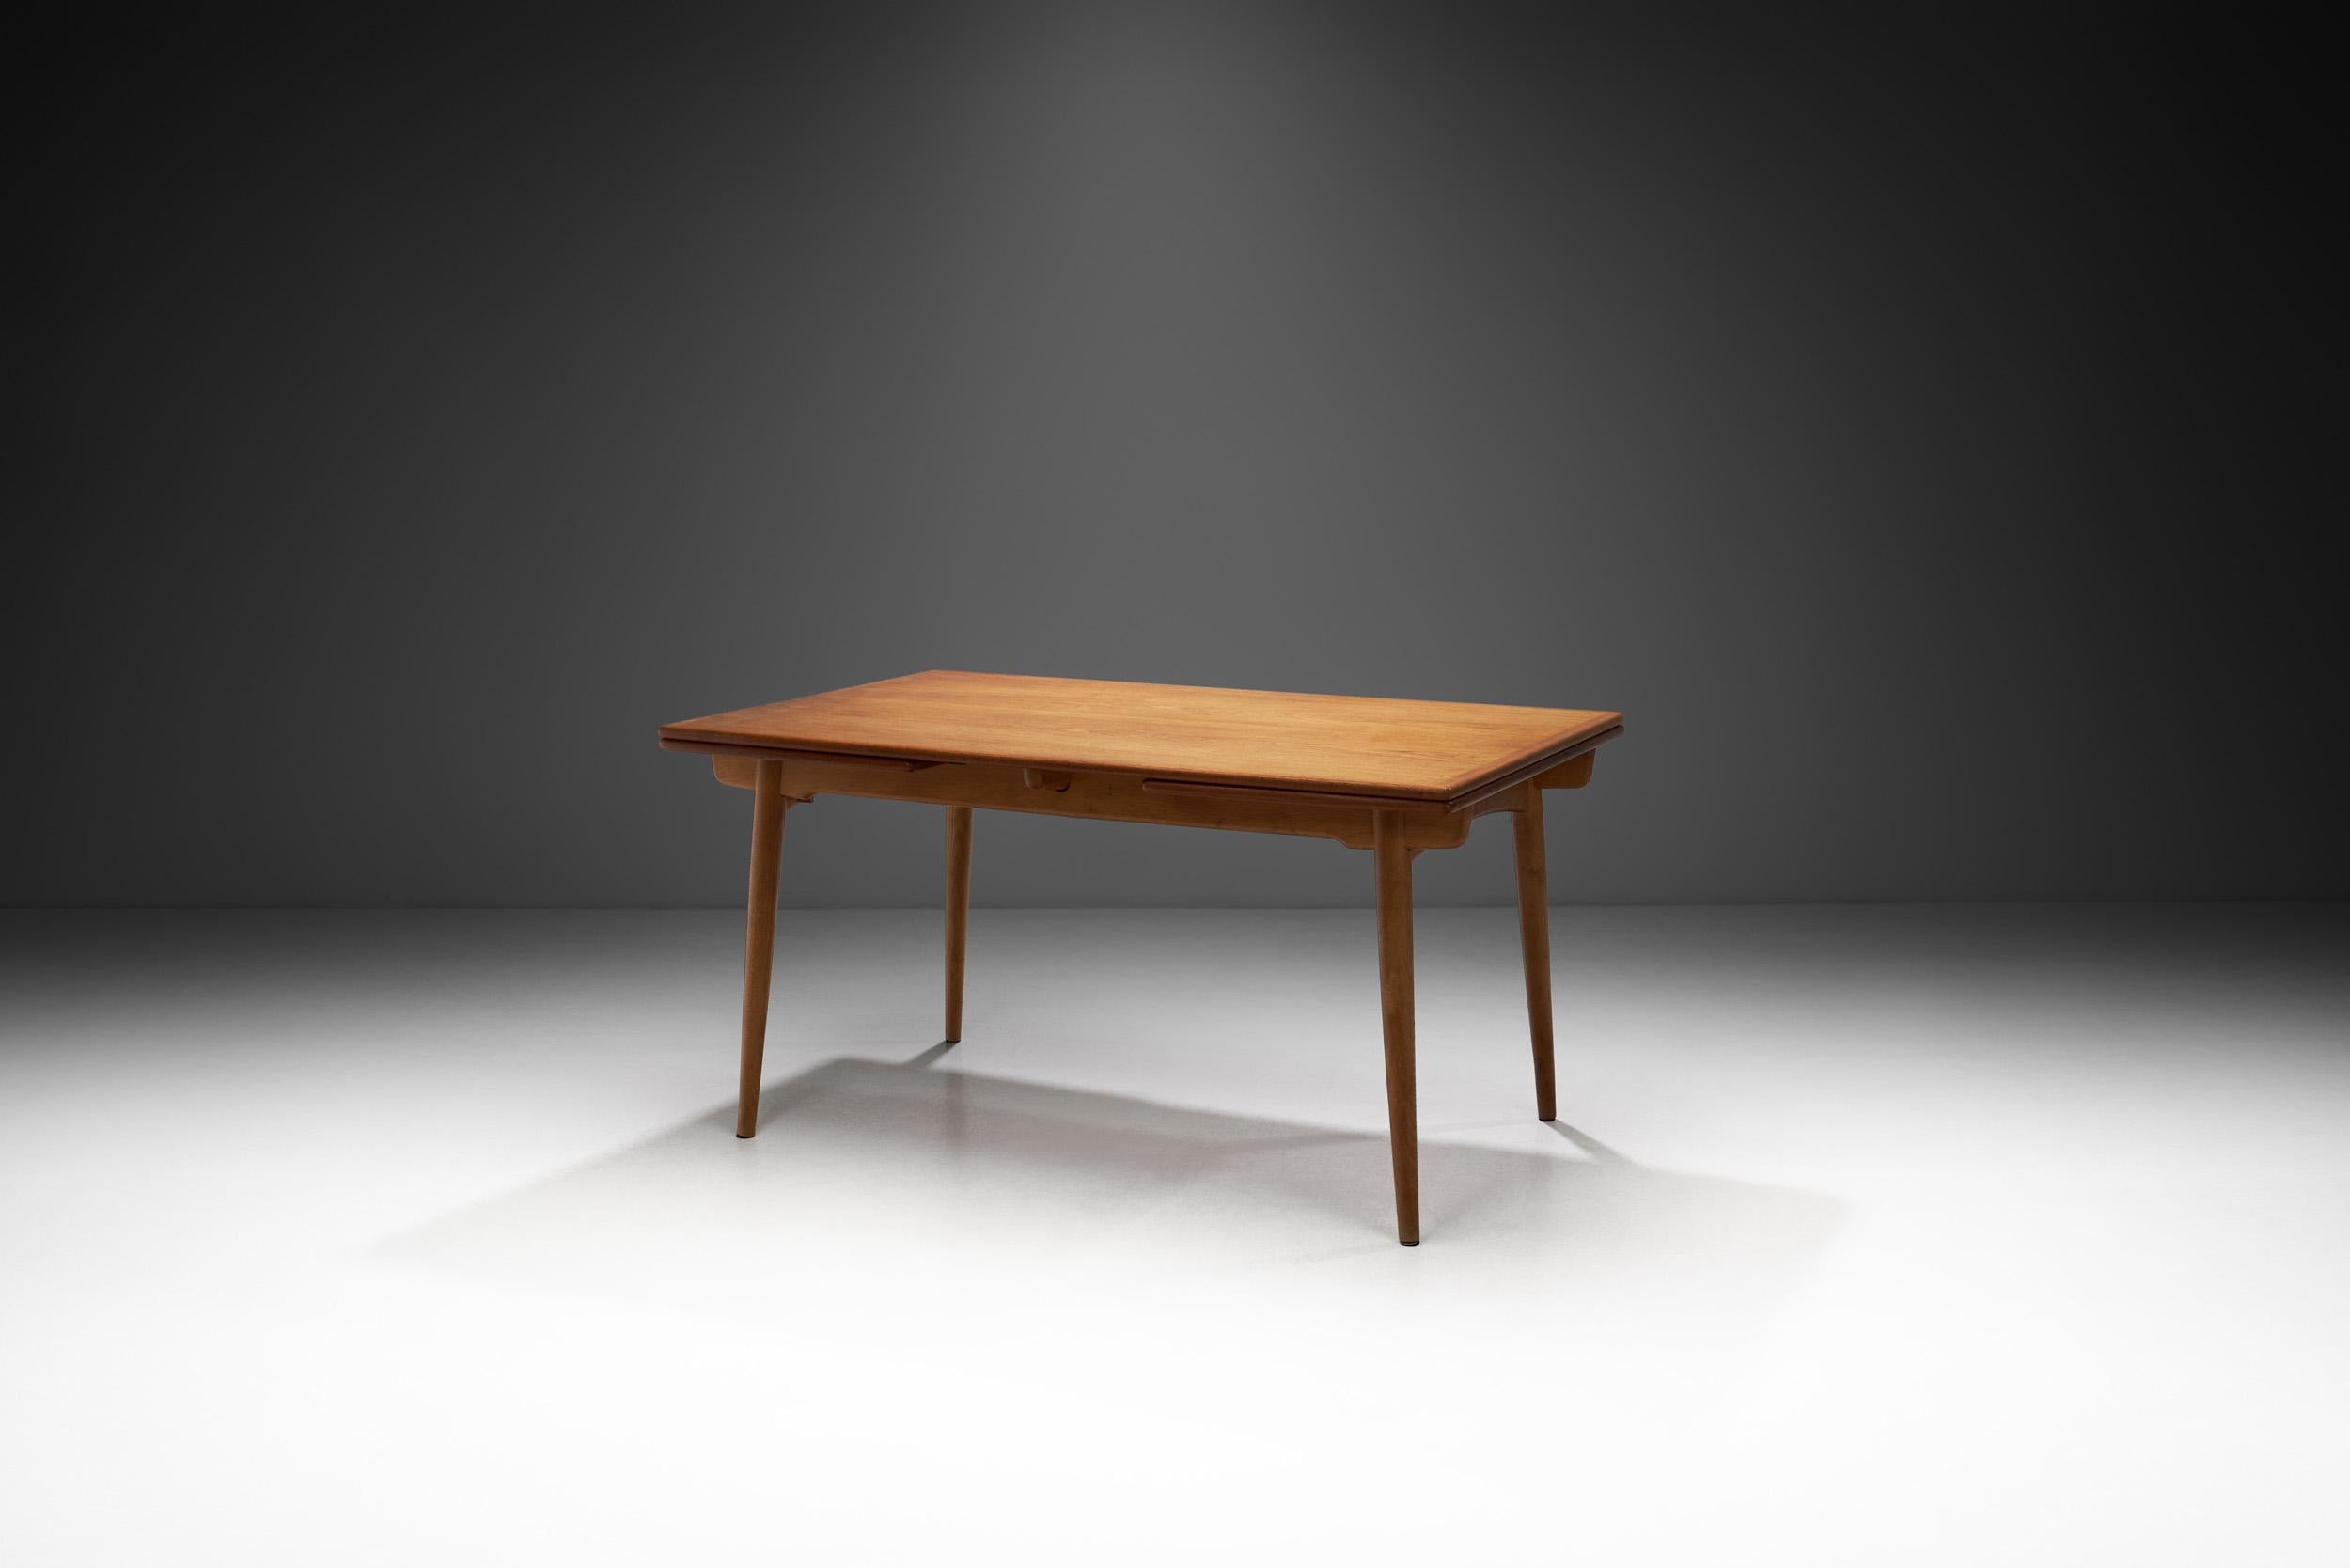 This oak and teak “AT-312” dining table was designed by Hans Wegner in the 1950s and its title of ‘iconic’ is well deserved. Created by a designer who is credited as one of the main driving forces of the mid-century Danish modern movement, this